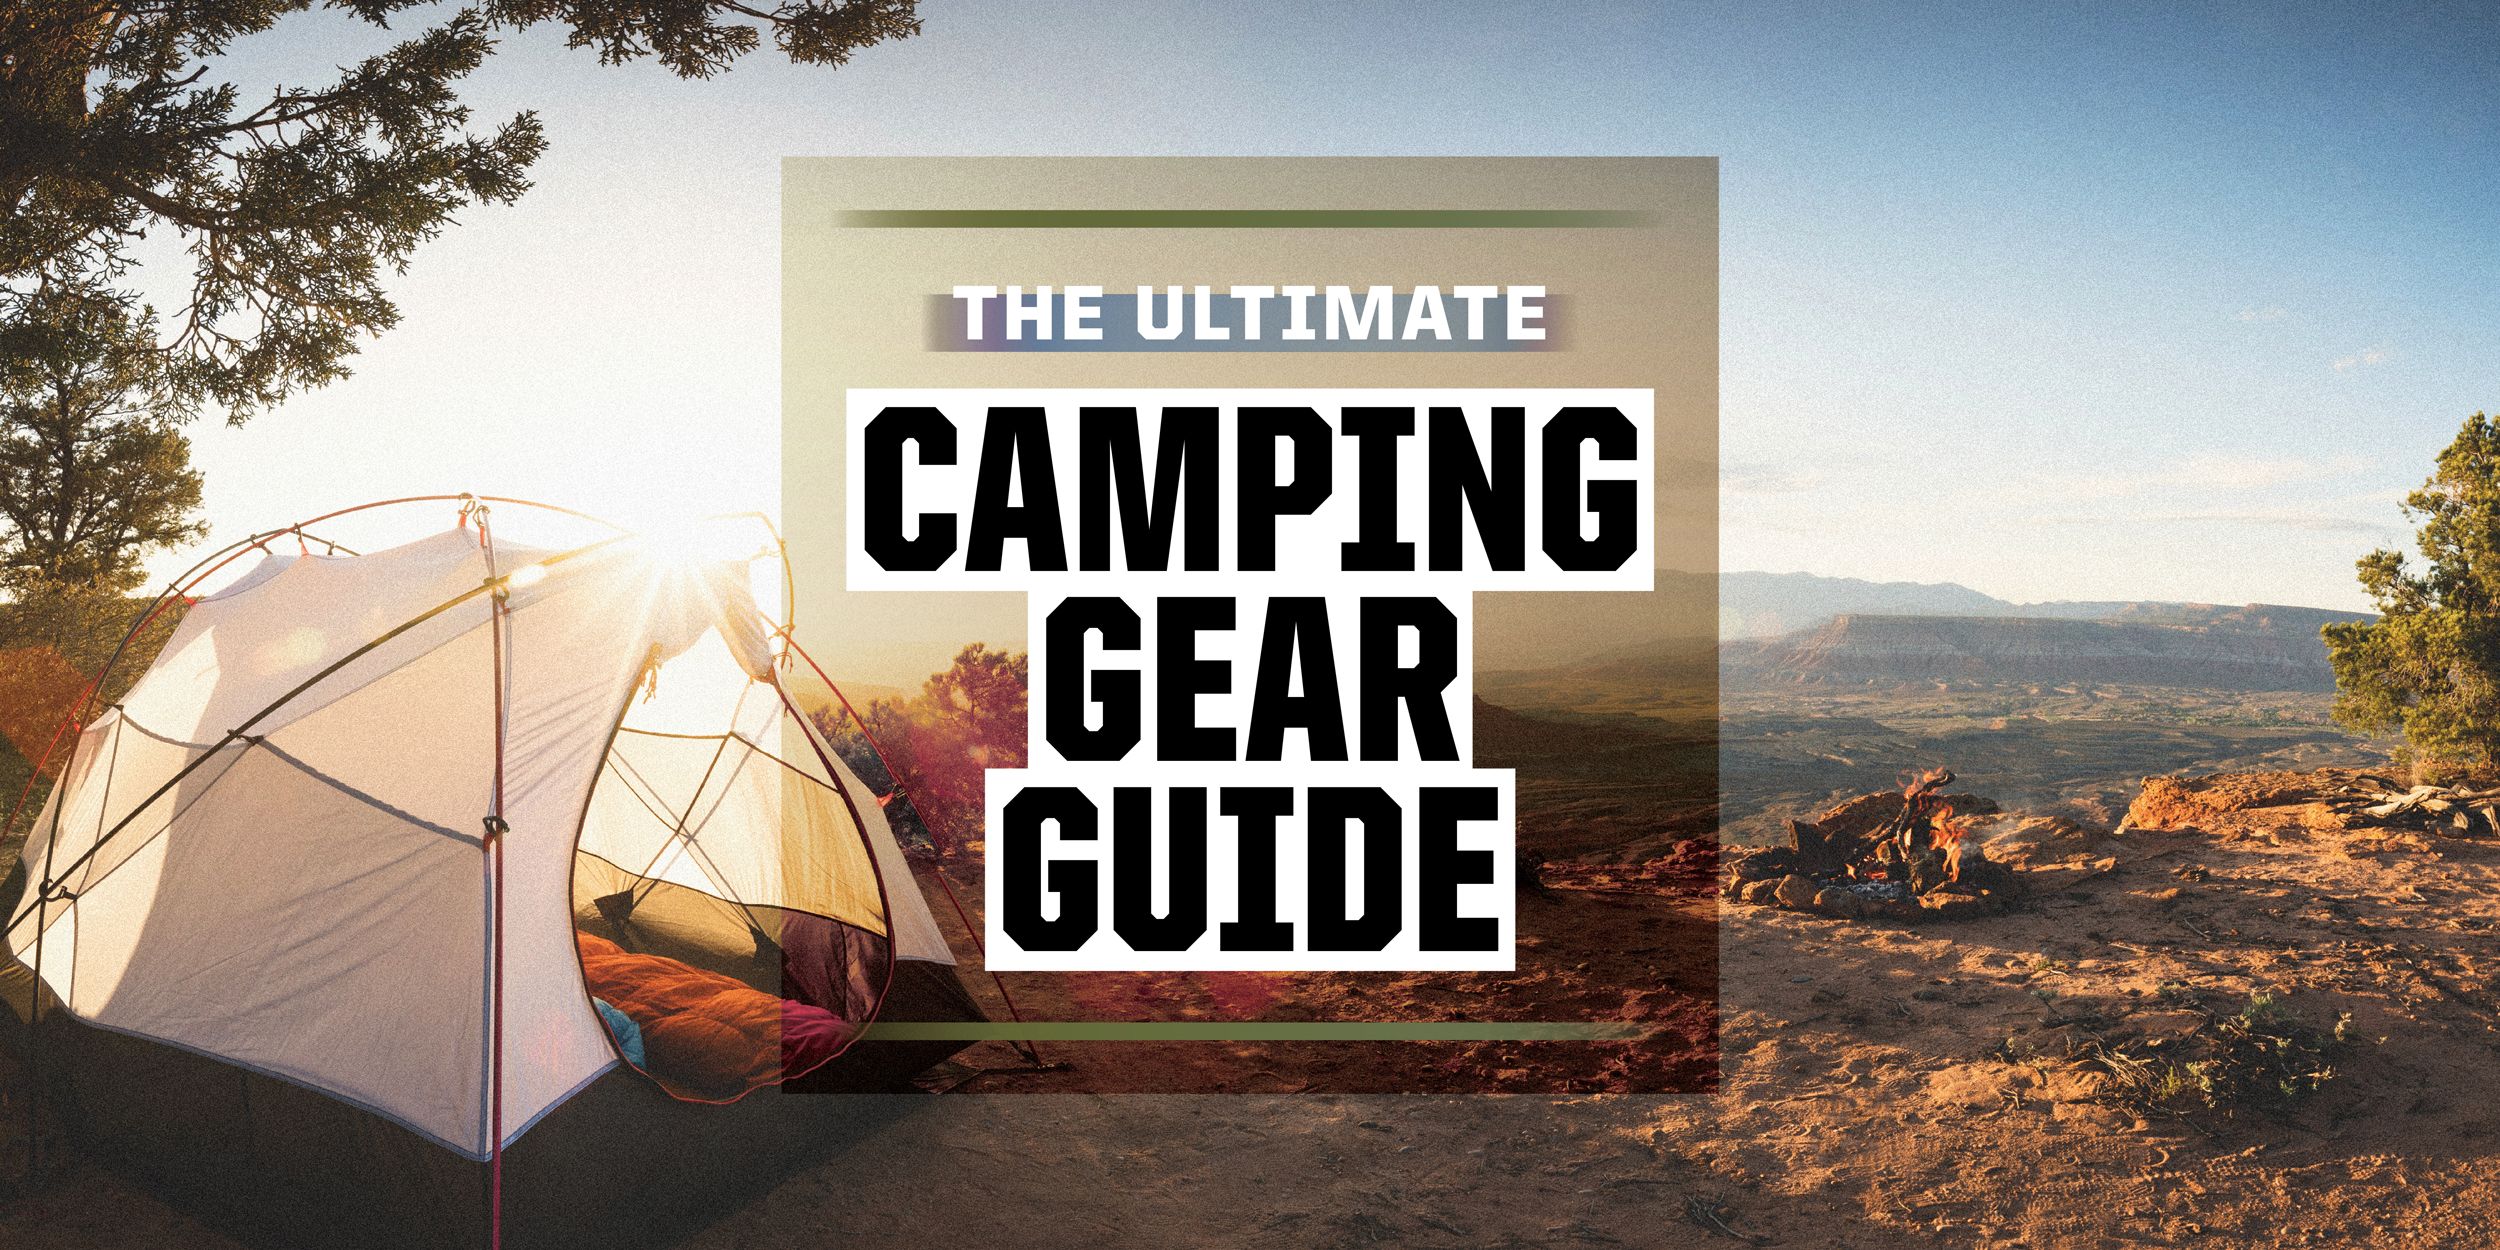 Make Your Camping Trip a Success with These Essential Gear Items